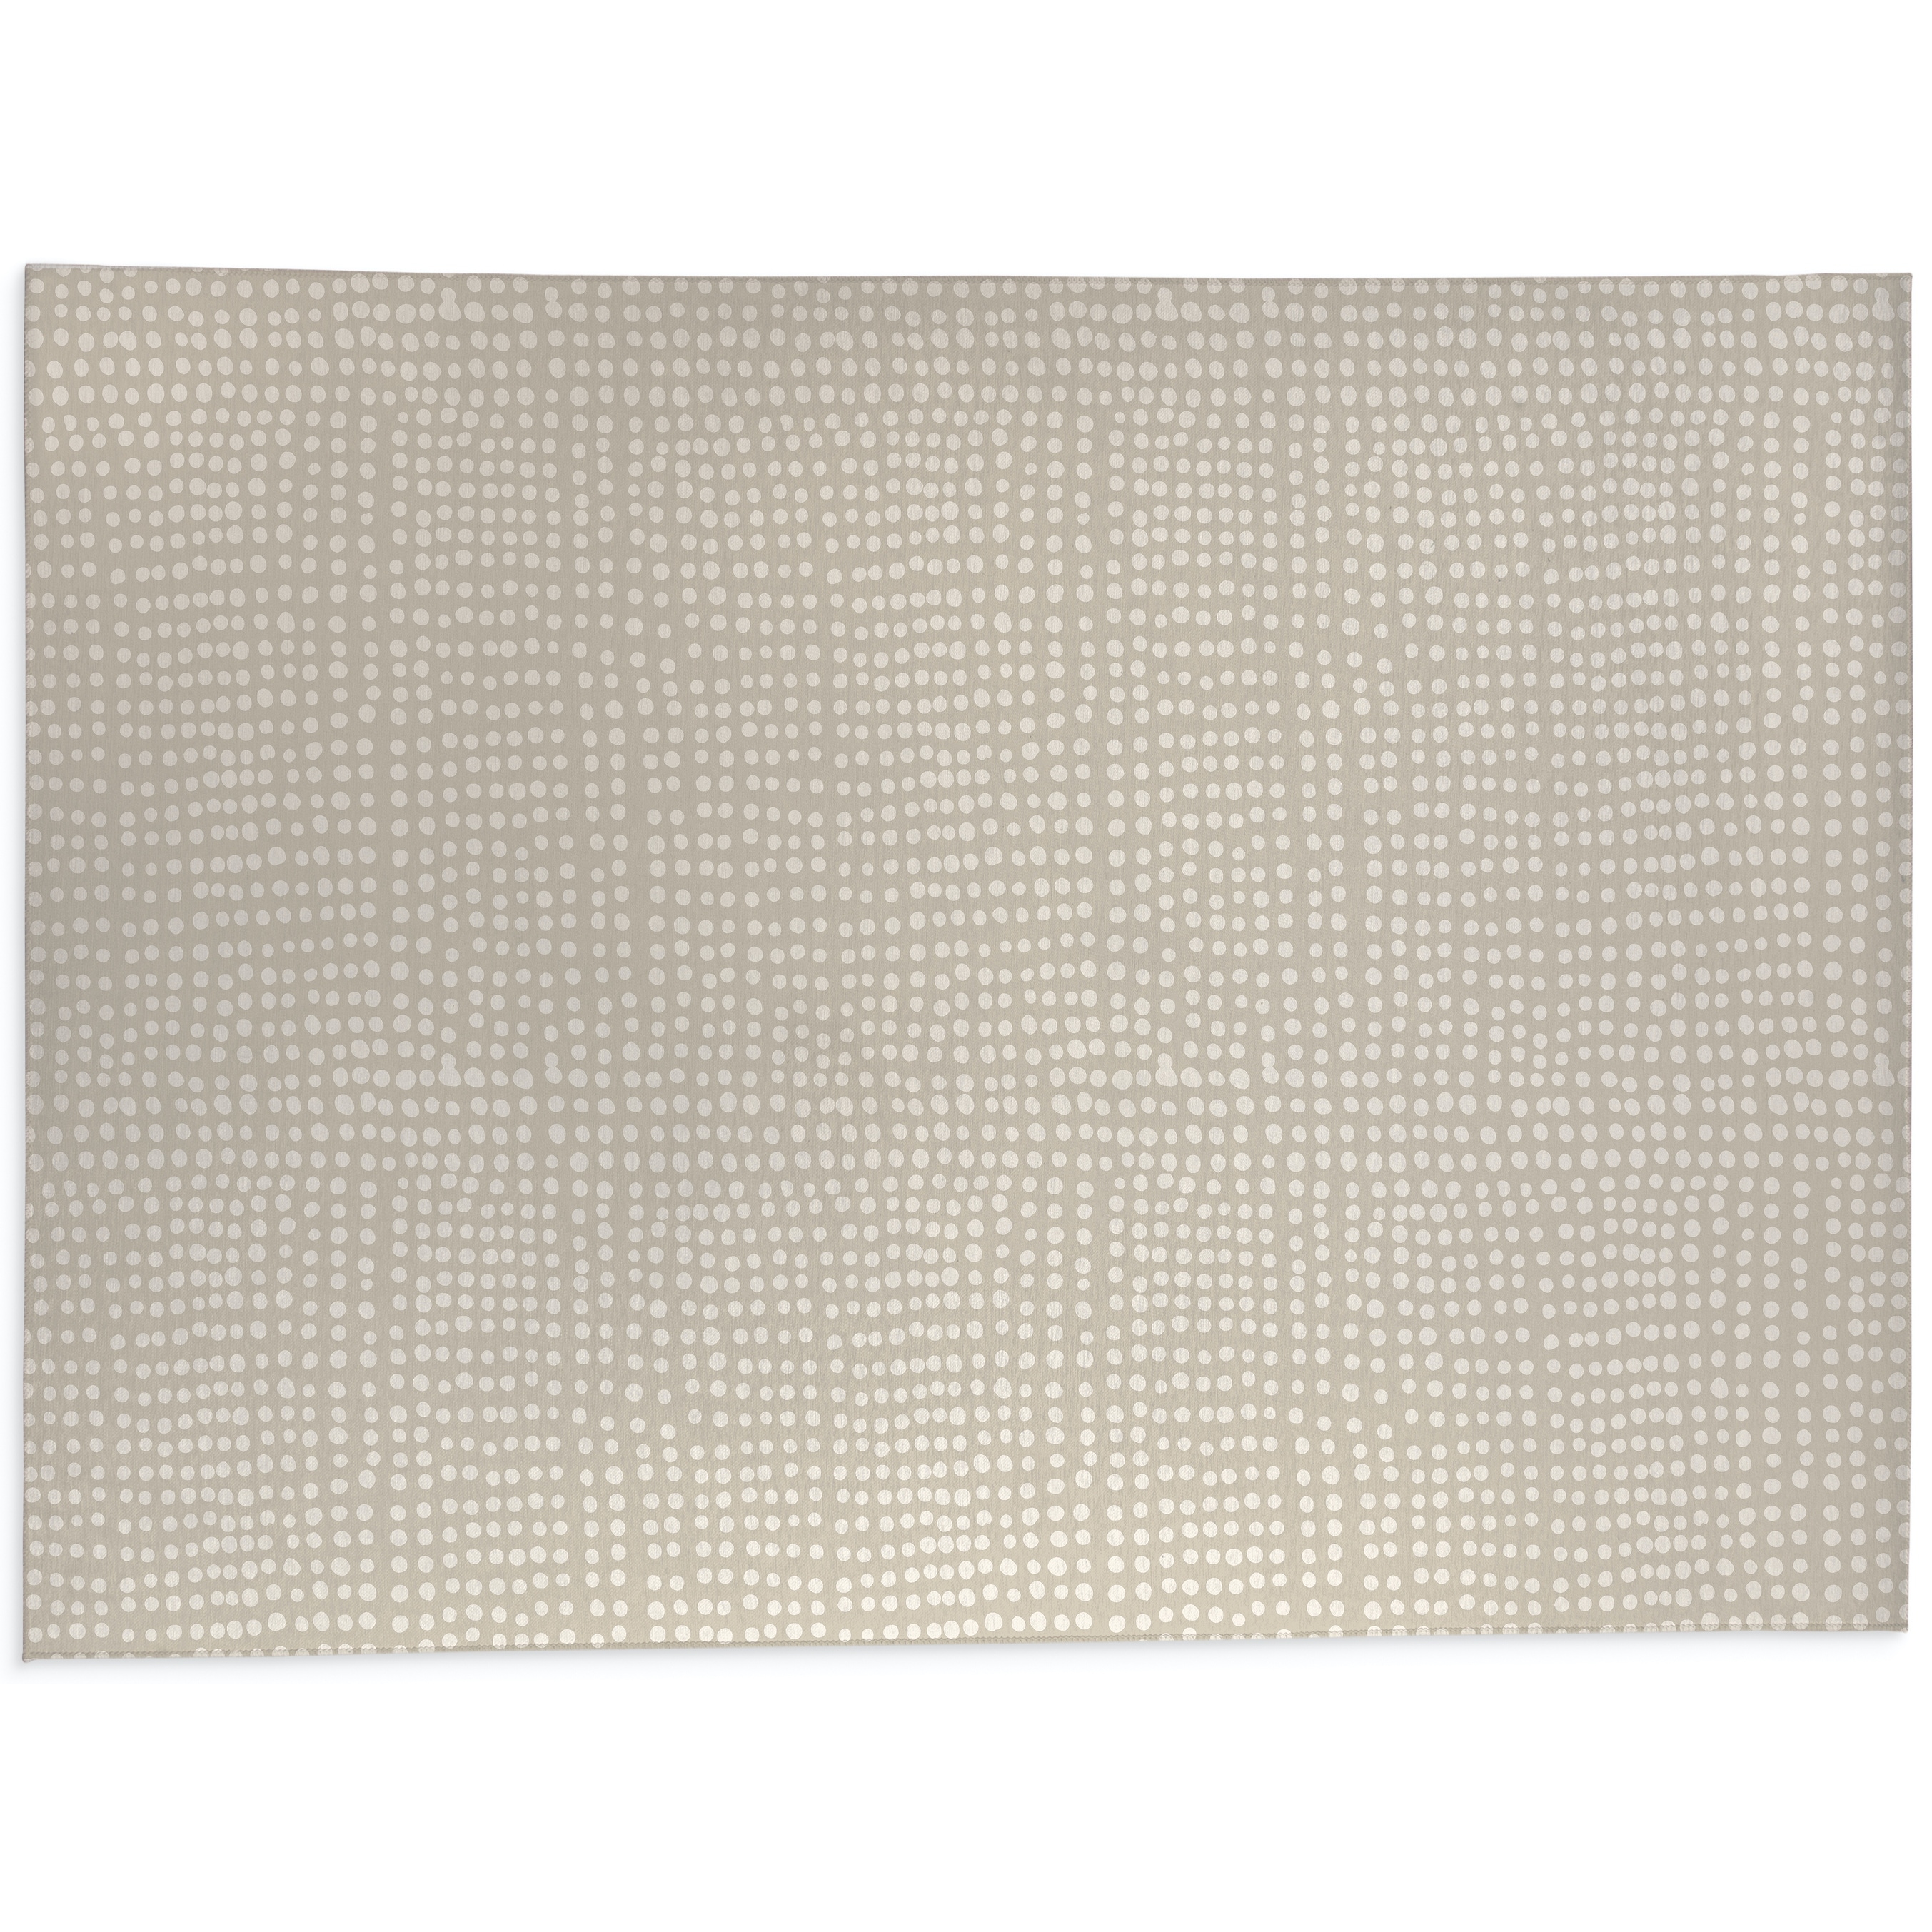 https://ak1.ostkcdn.com/images/products/is/images/direct/c593816d53e34b0ca5cf44cf3fbe839230801878/DOTS-ABSTRACT-BEIGE-Indoor-Door-Mat-By-Kavka-Designs.jpg